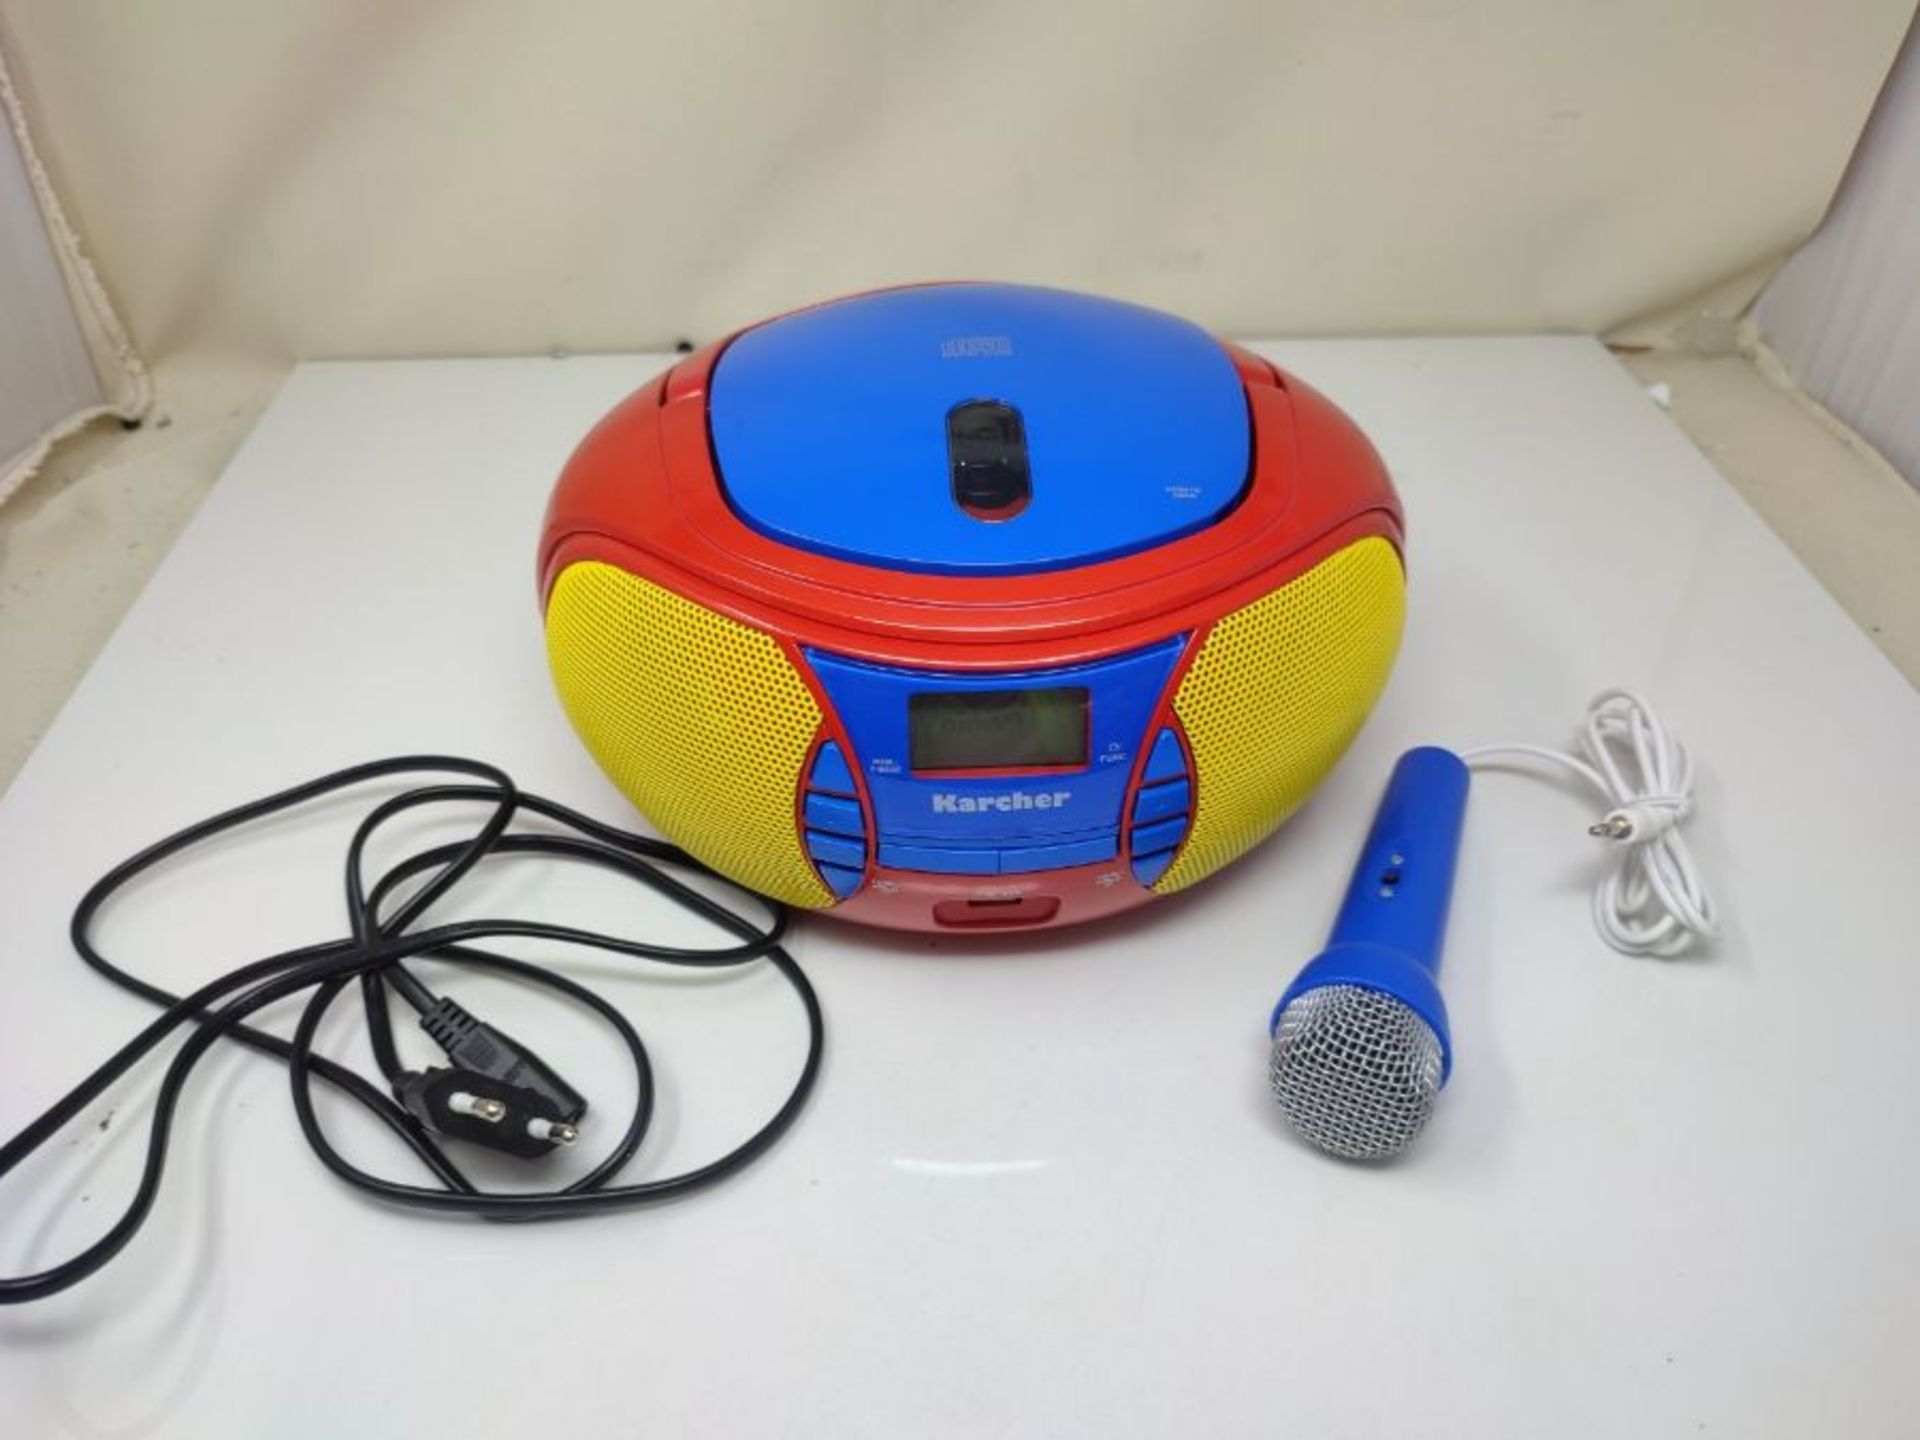 Karcher RR 5026 Portable CD Radio - Colourful Children's Boombox with CD Player, FM Ra - Image 3 of 3